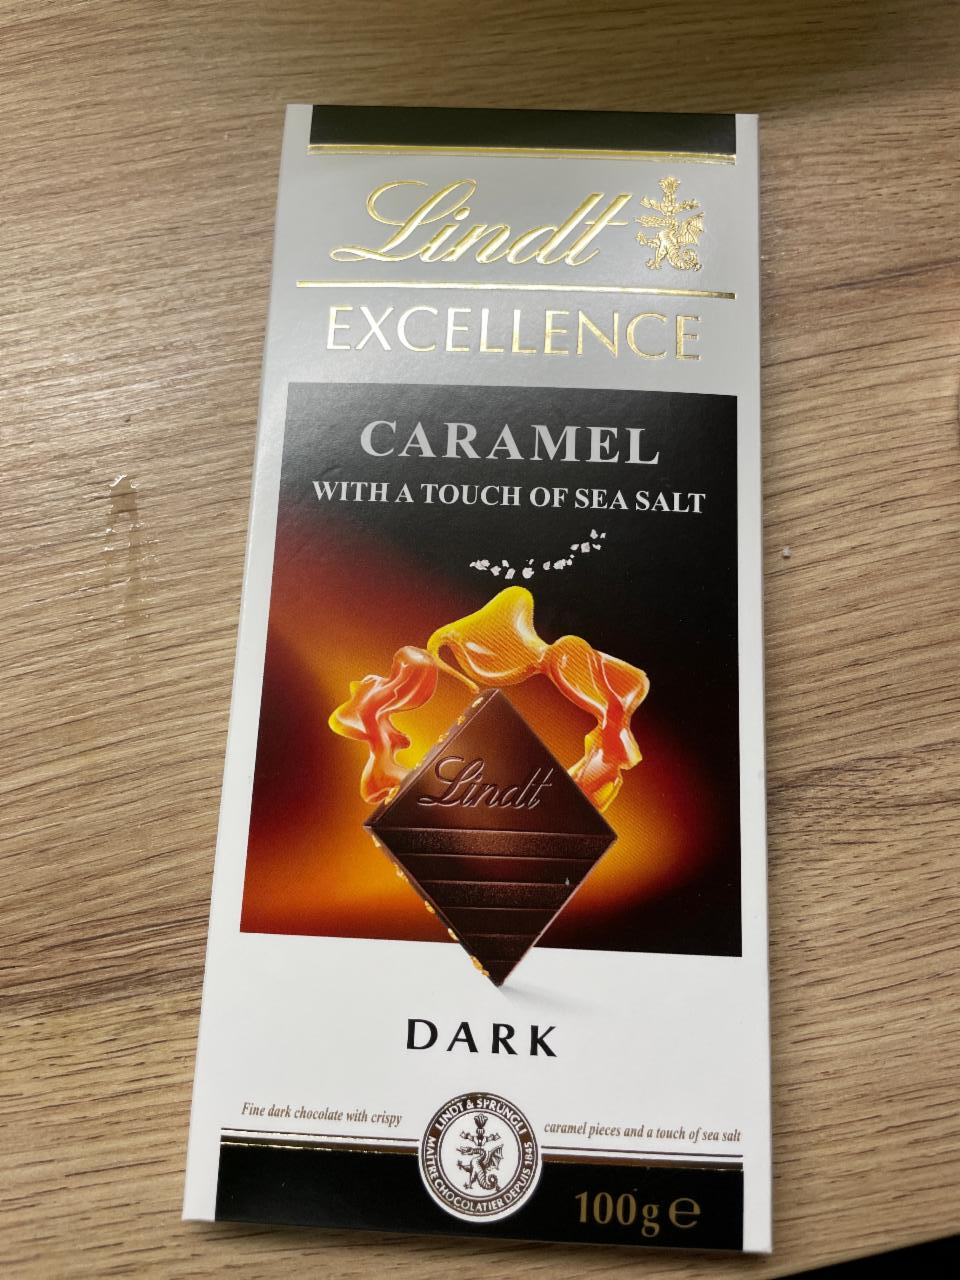 Fotografie - Excellence Caramel with a touch of sea salt Lindt